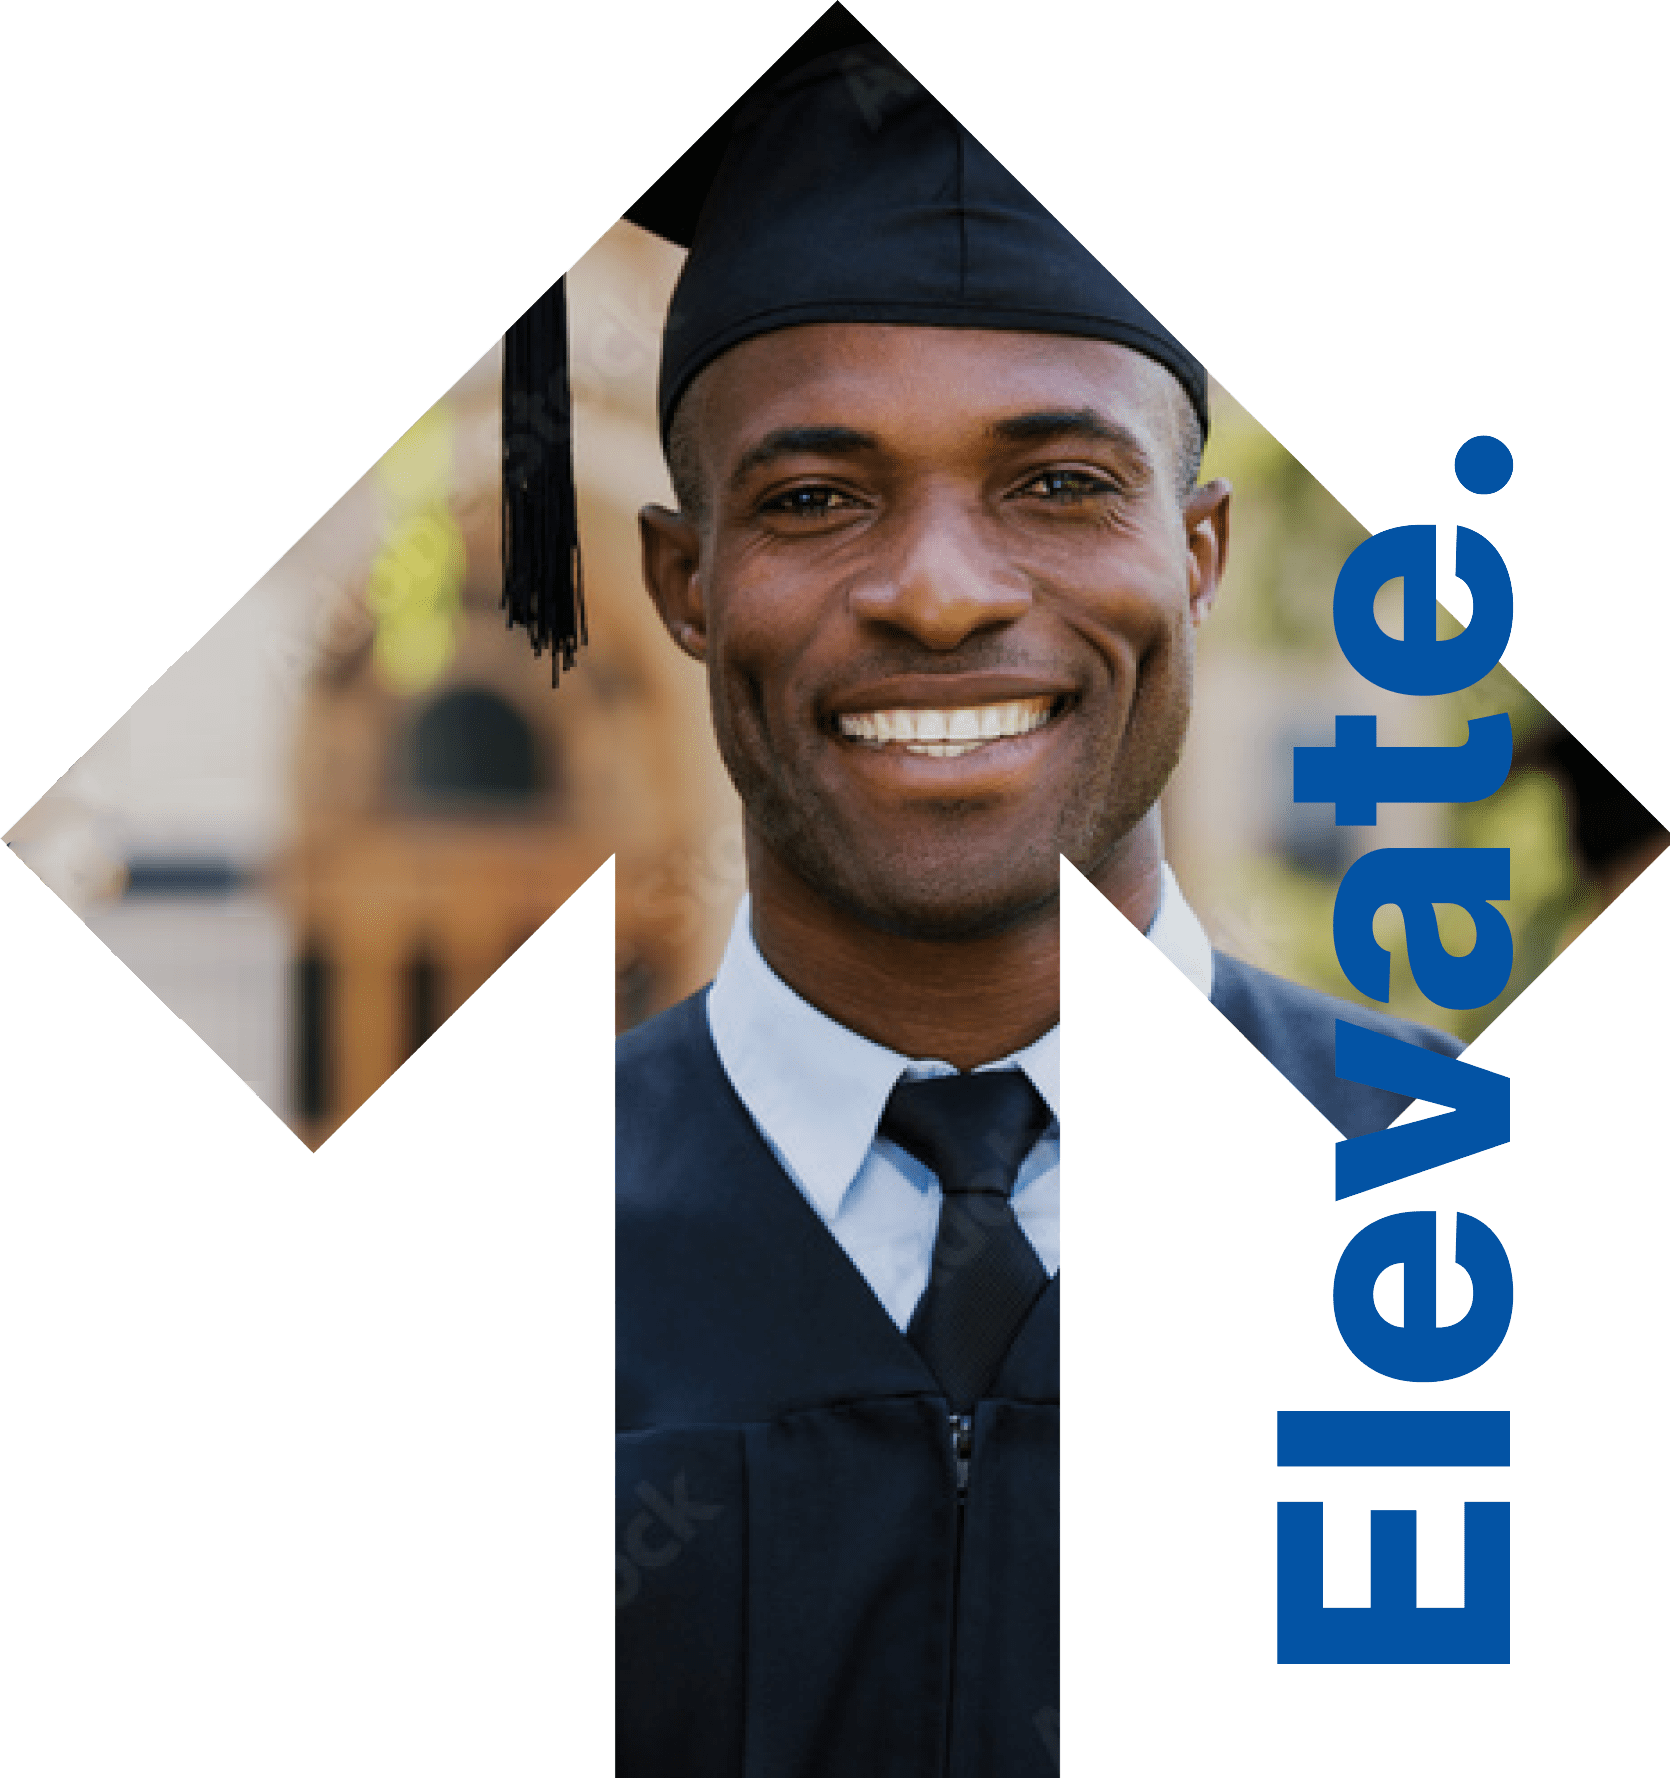 Elevate Graphic Arrow with Man Graduating